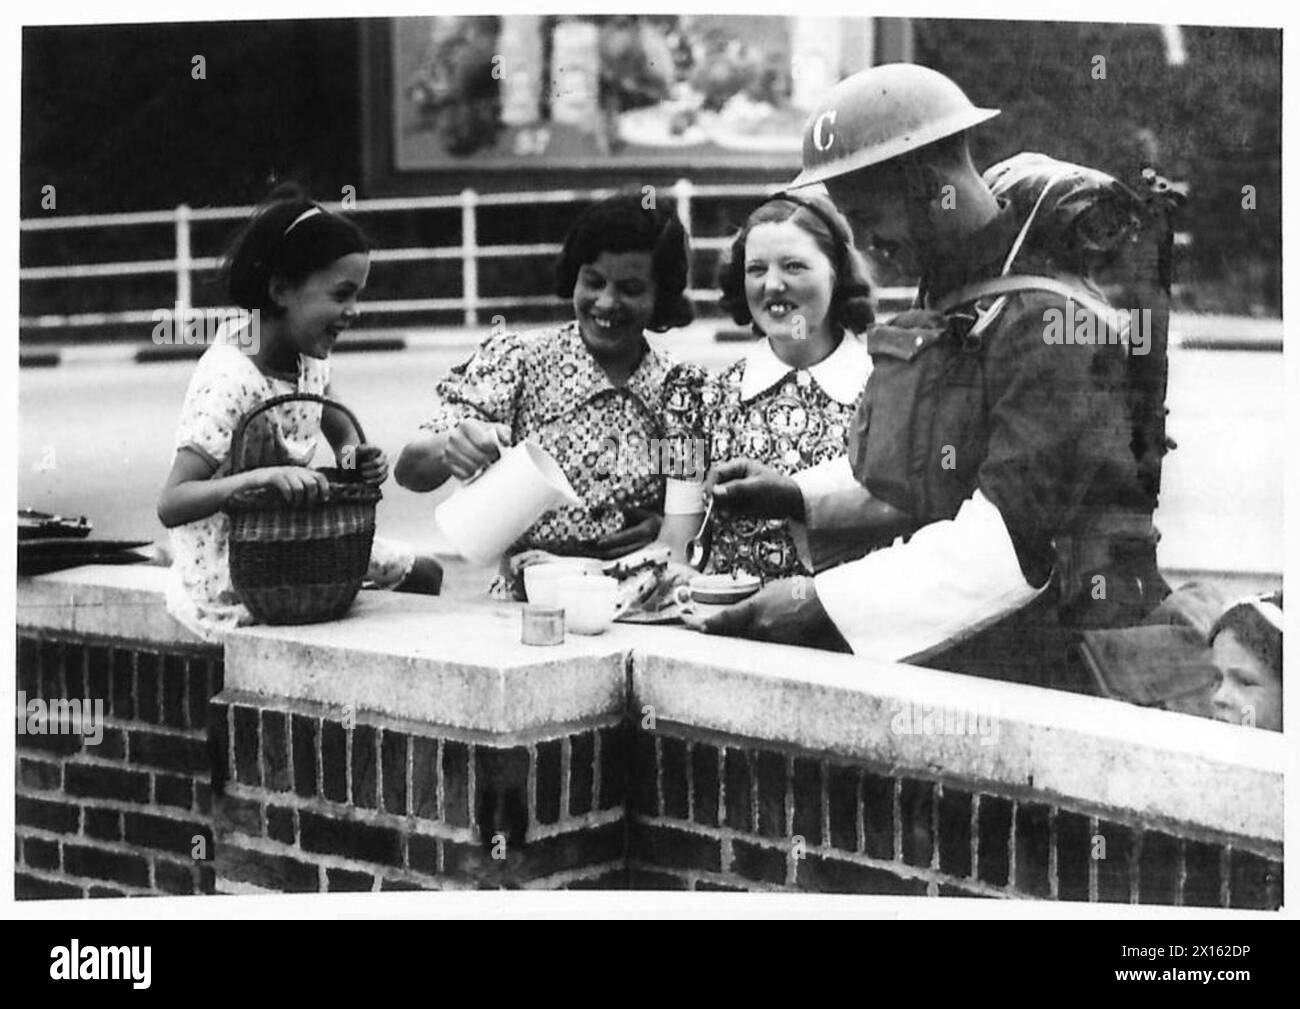 TRAFFIC CONTROL GROUP OF THE ALDERSHOT COMMAND - A welcome break. Off duty. A local resident supplying tea to the boys at rest time British Army Stock Photo